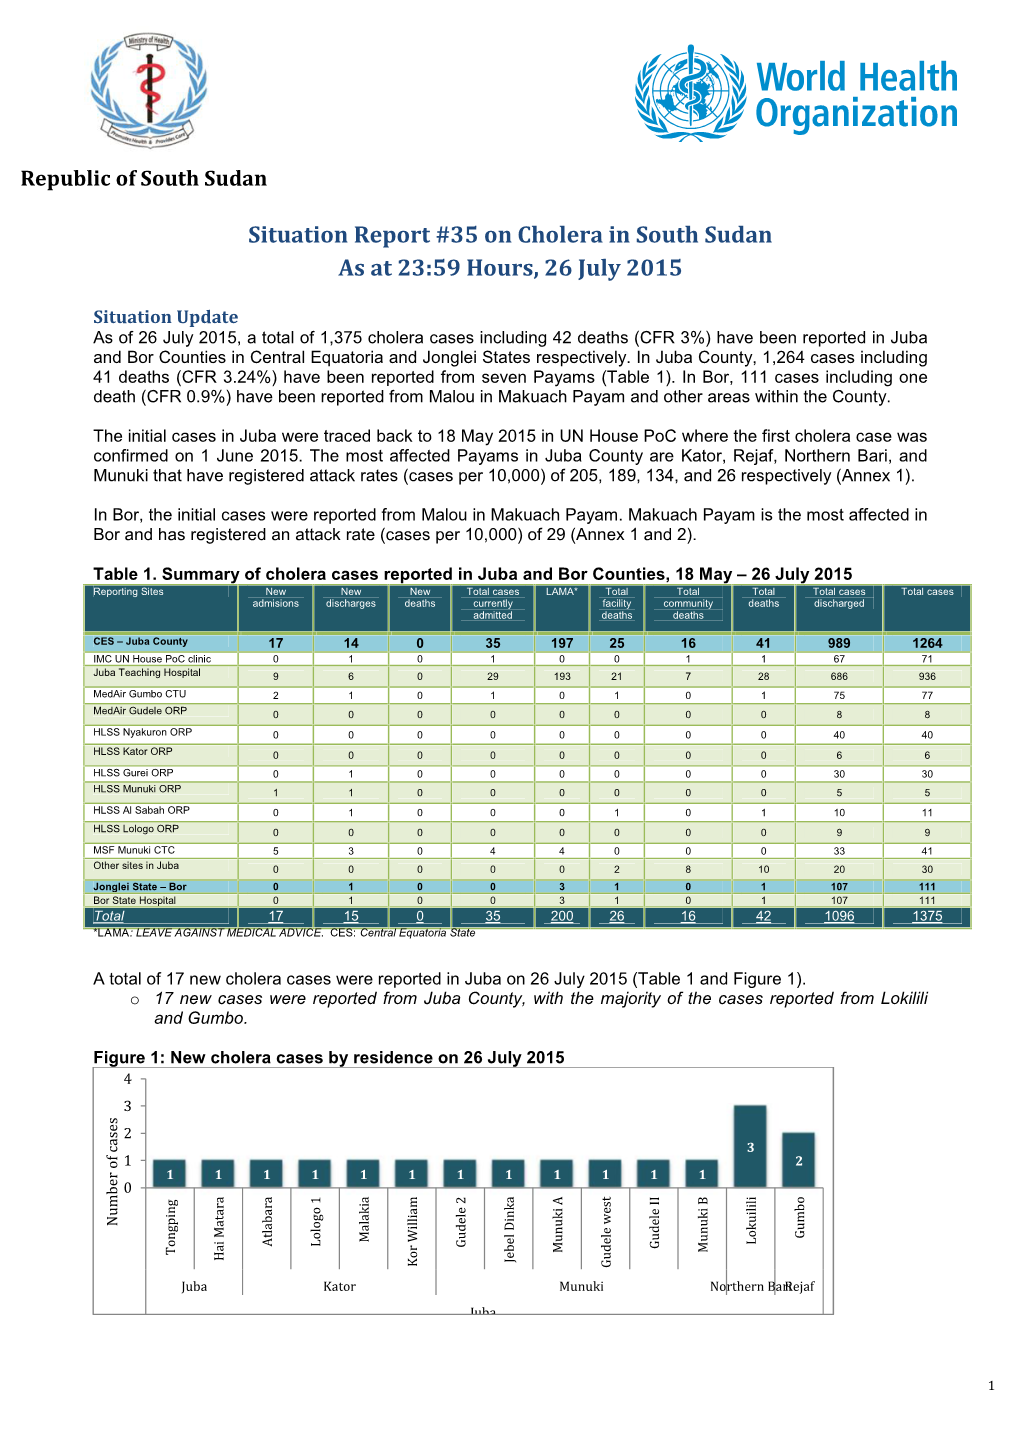 Situation Report #35 on Cholera in South Sudan As at 23:59 Hours, 26 July 2015